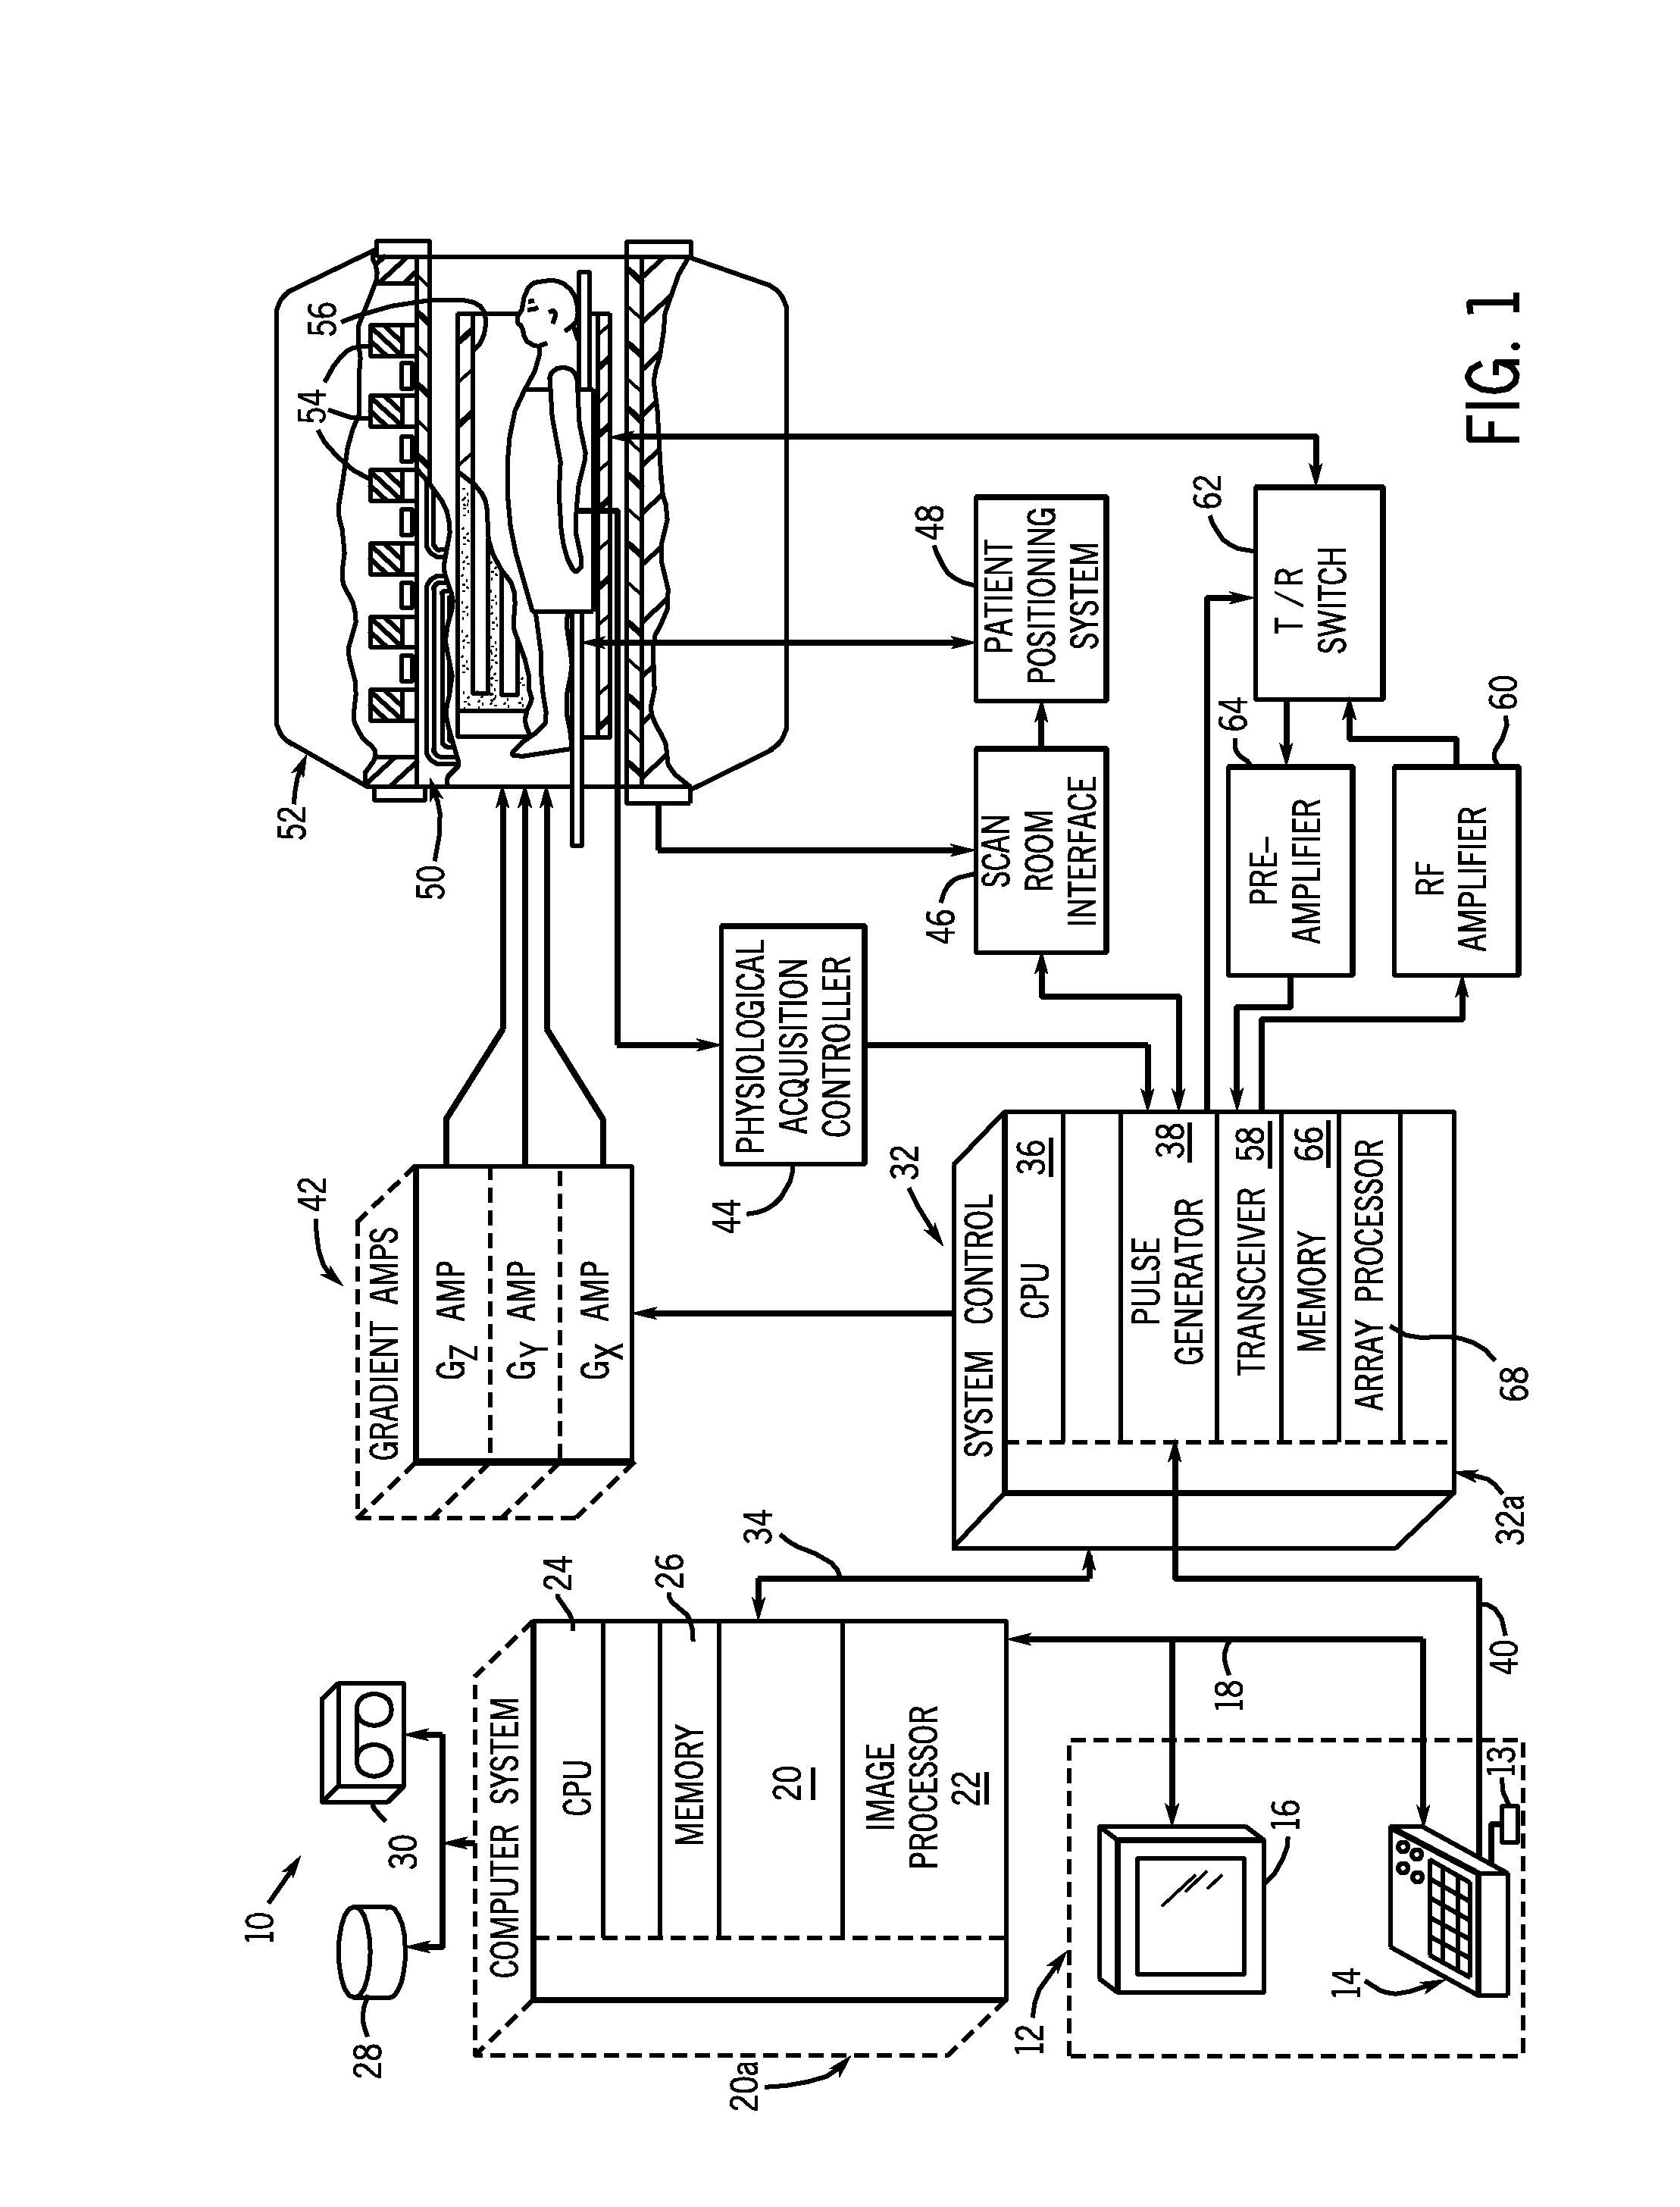 Method and apparatus for interactively setting parameters of an MR imaging sequence through inspection of frequency spectrum